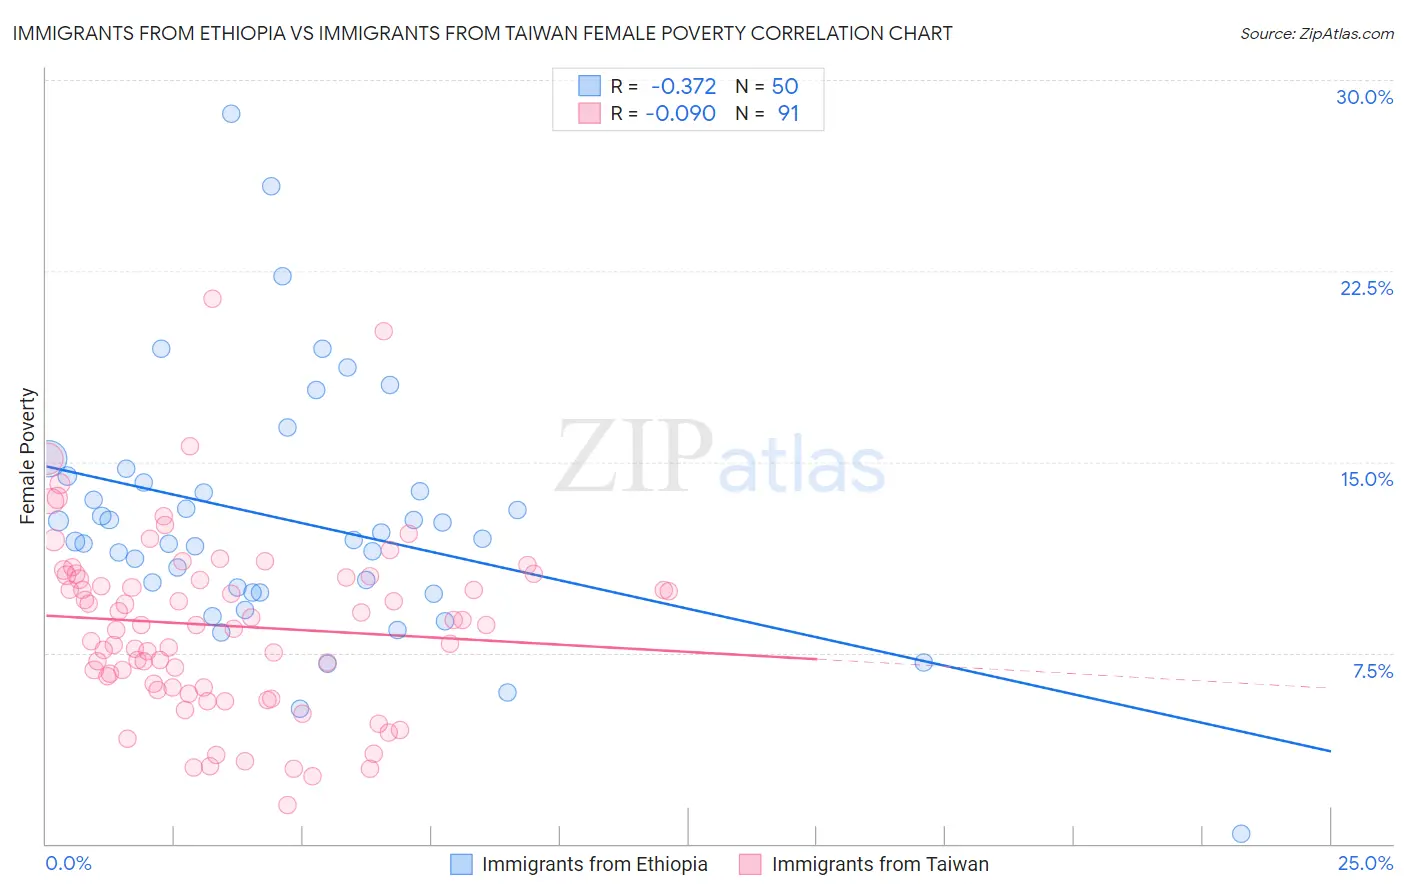 Immigrants from Ethiopia vs Immigrants from Taiwan Female Poverty